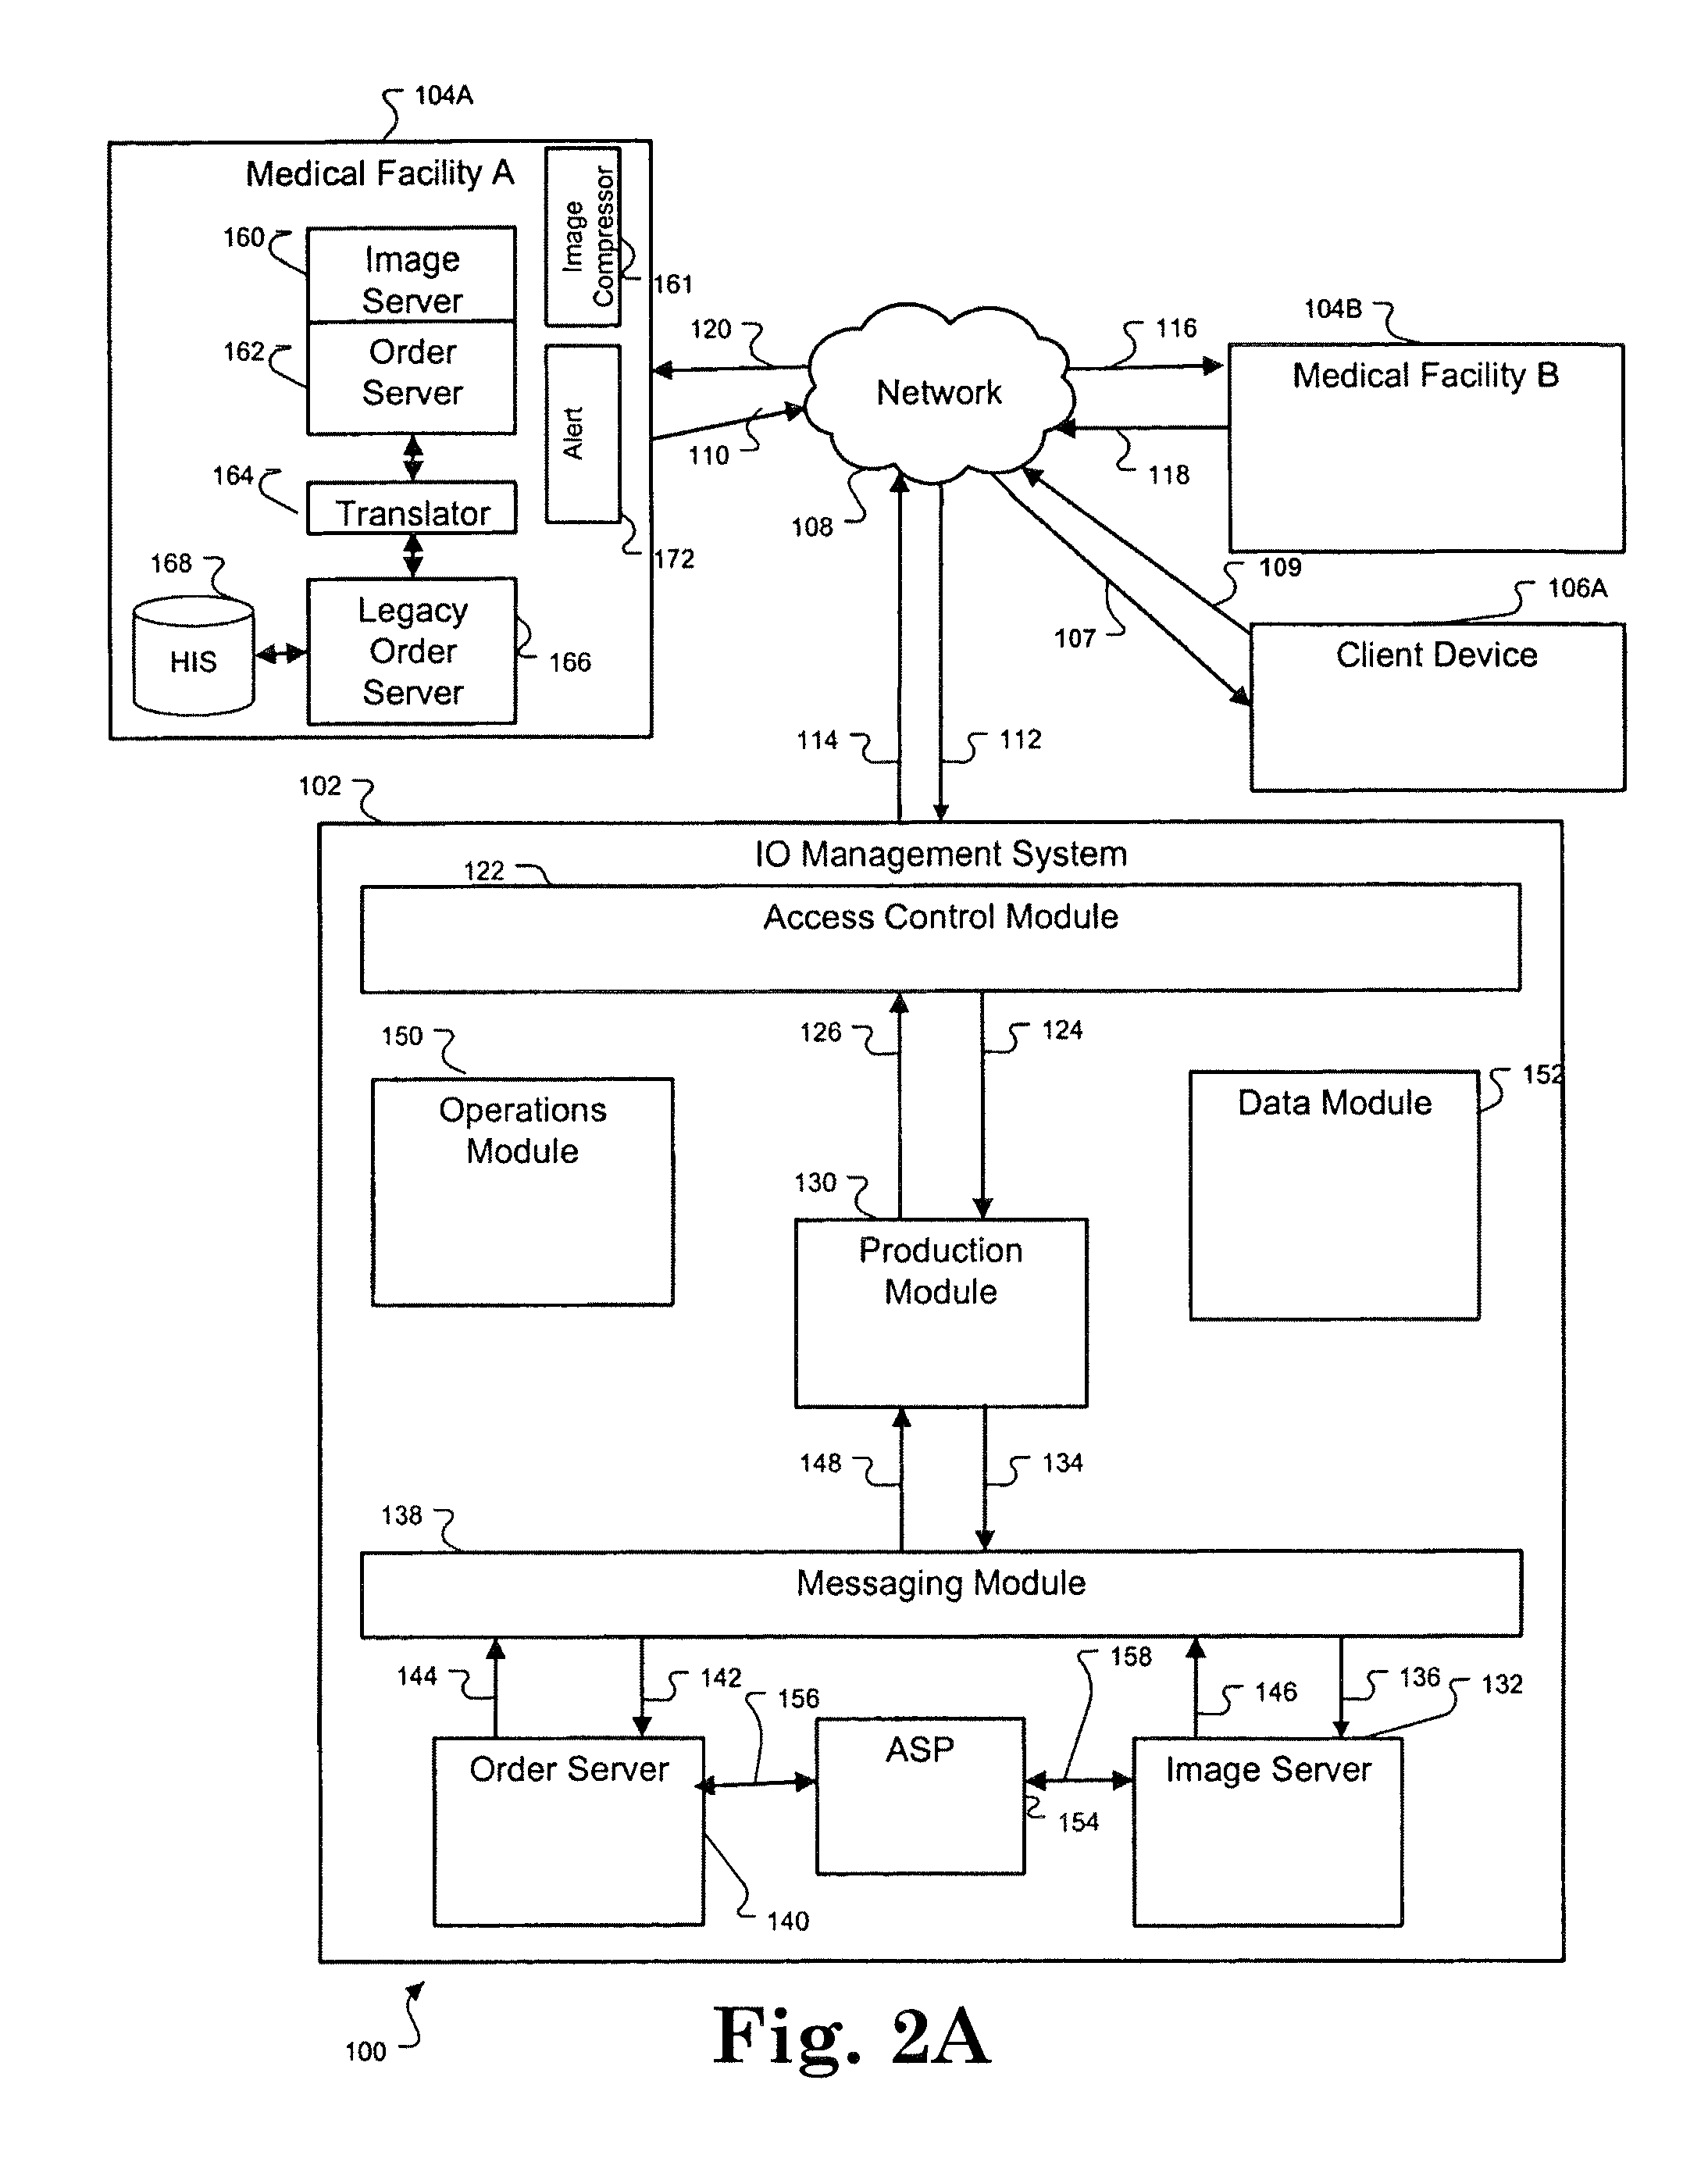 Teleradiology image processing system